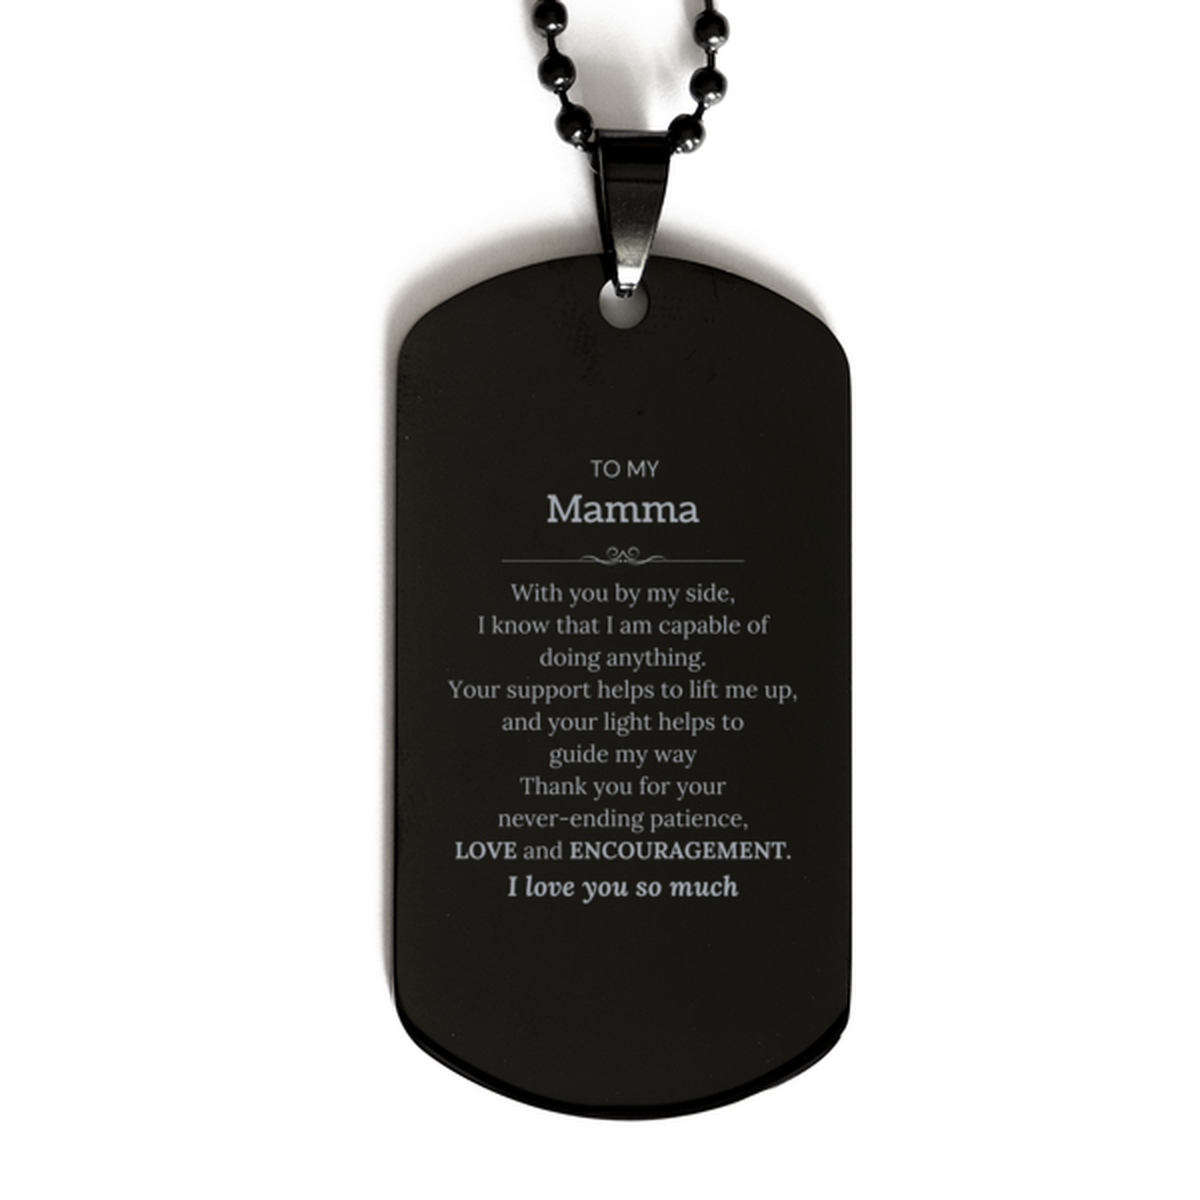 Appreciation Mamma Black Dog Tag Gifts, To My Mamma Birthday Christmas Wedding Keepsake Gifts for Mamma With you by my side, I know that I am capable of doing anything. I love you so much